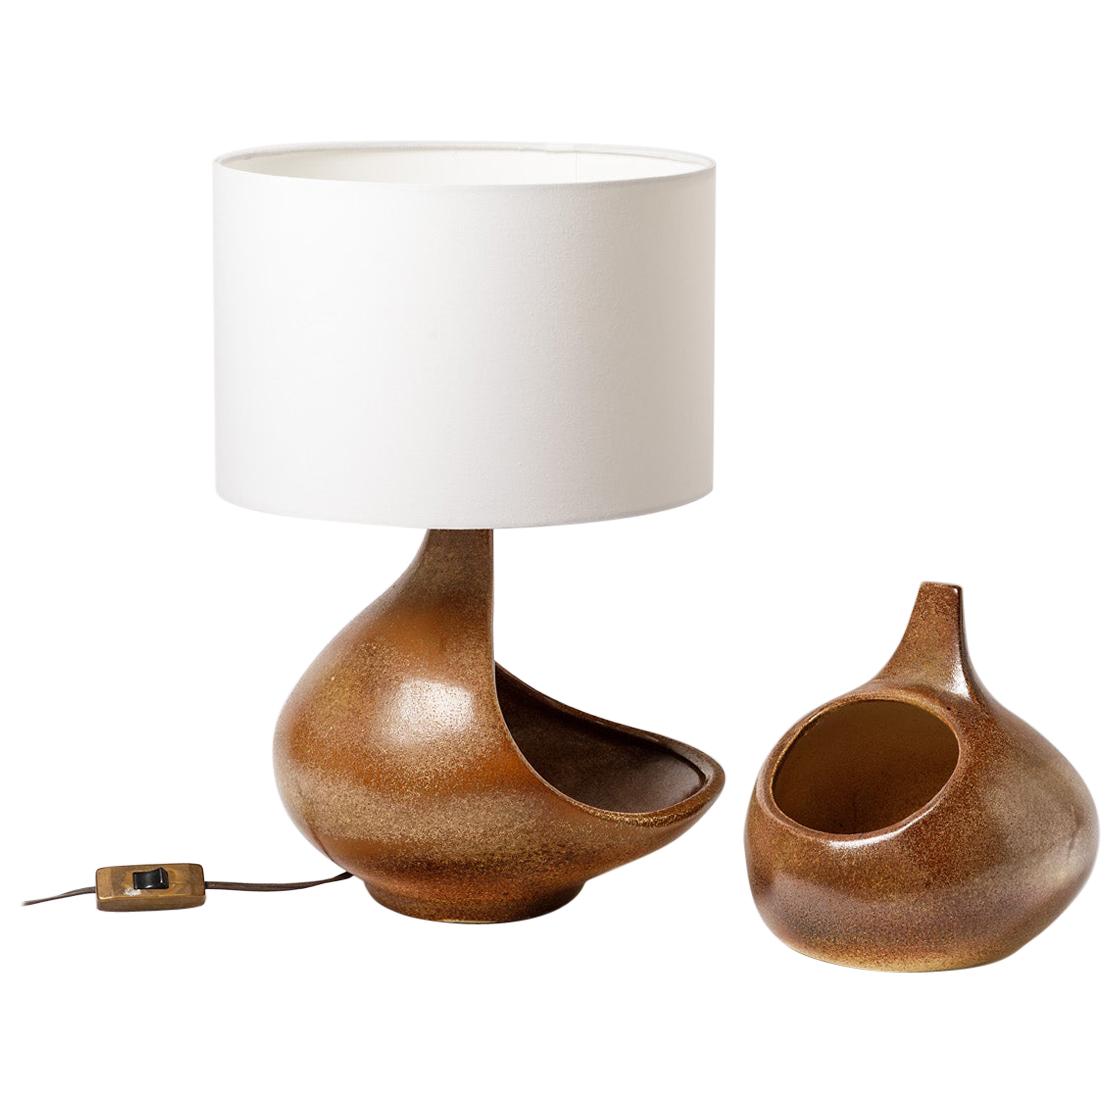 Original Brown Ceramic Table Lamp by Fred Stocker 20th Century Midcentury Design For Sale